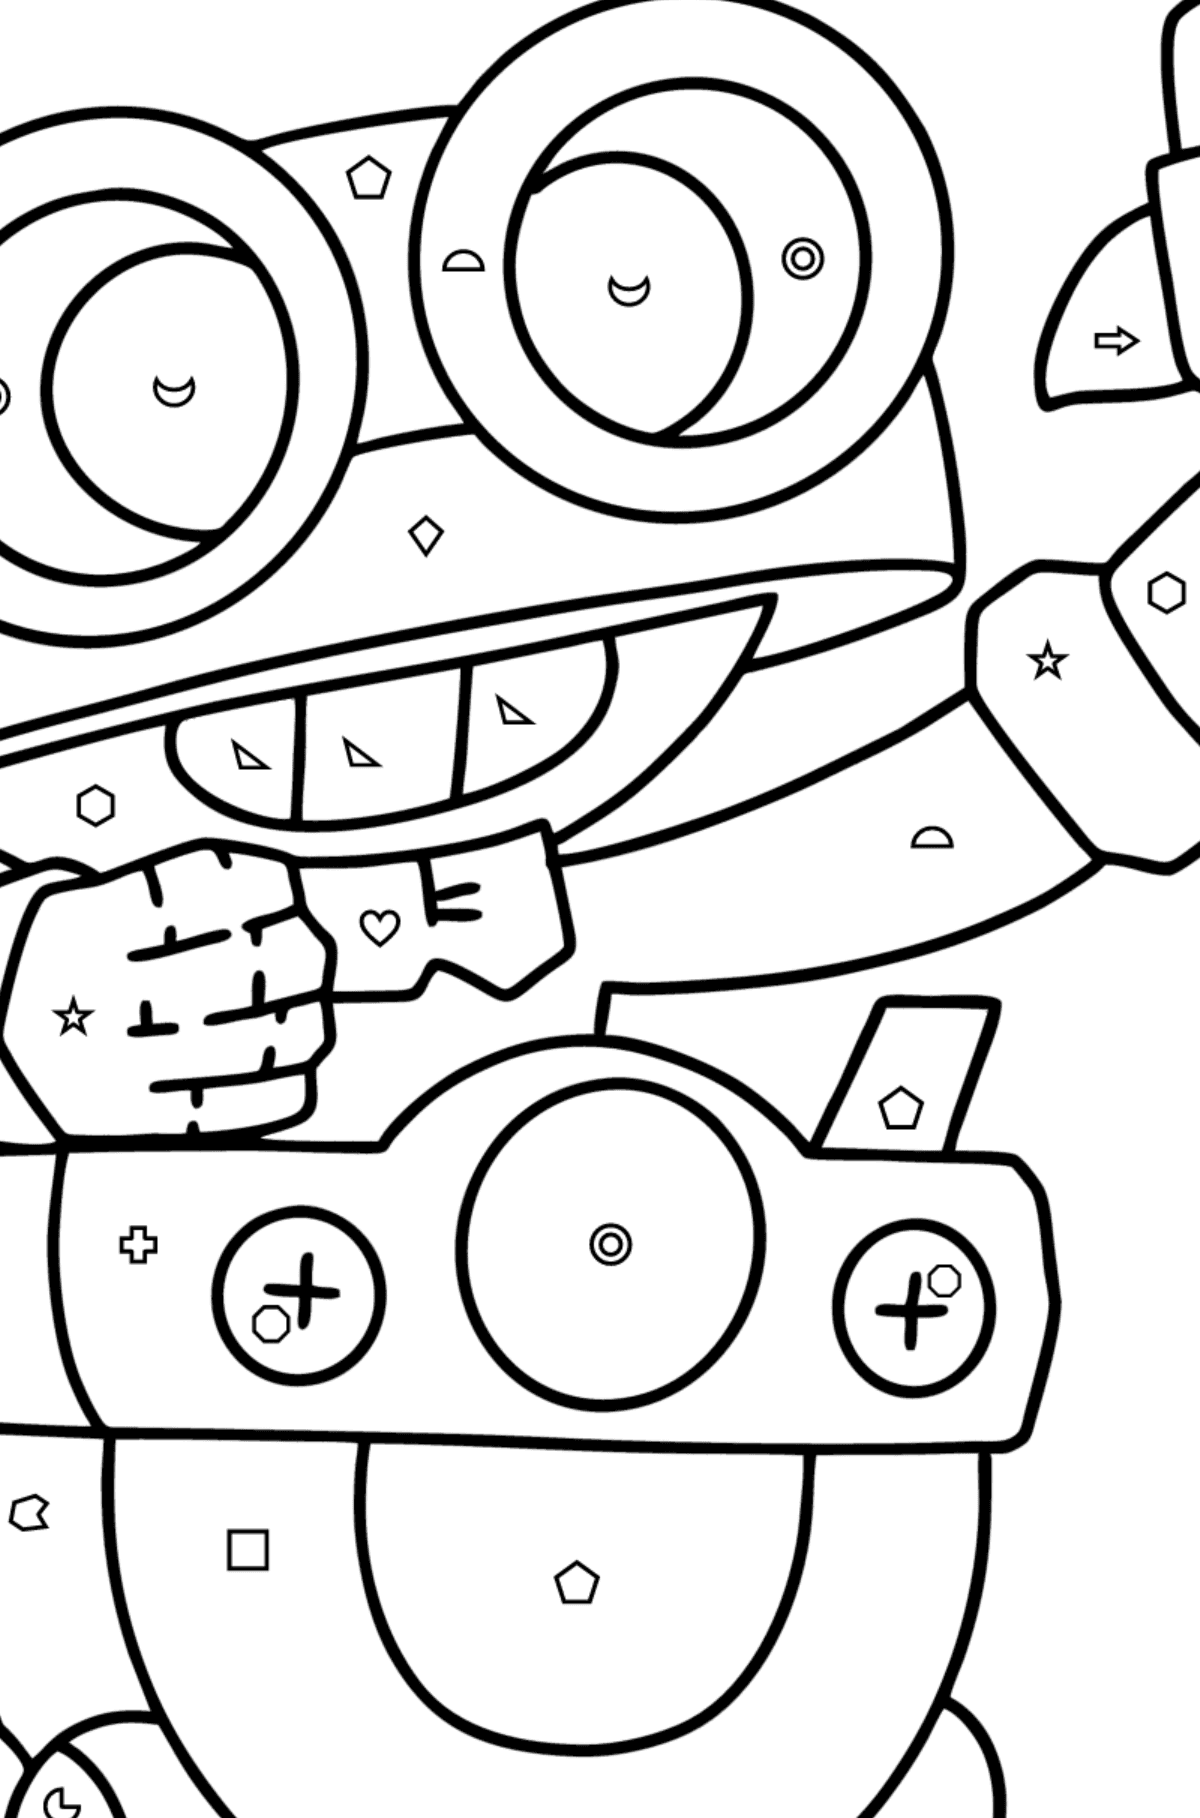 Brawl Stars Carl coloring page - Coloring by Geometric Shapes for Kids